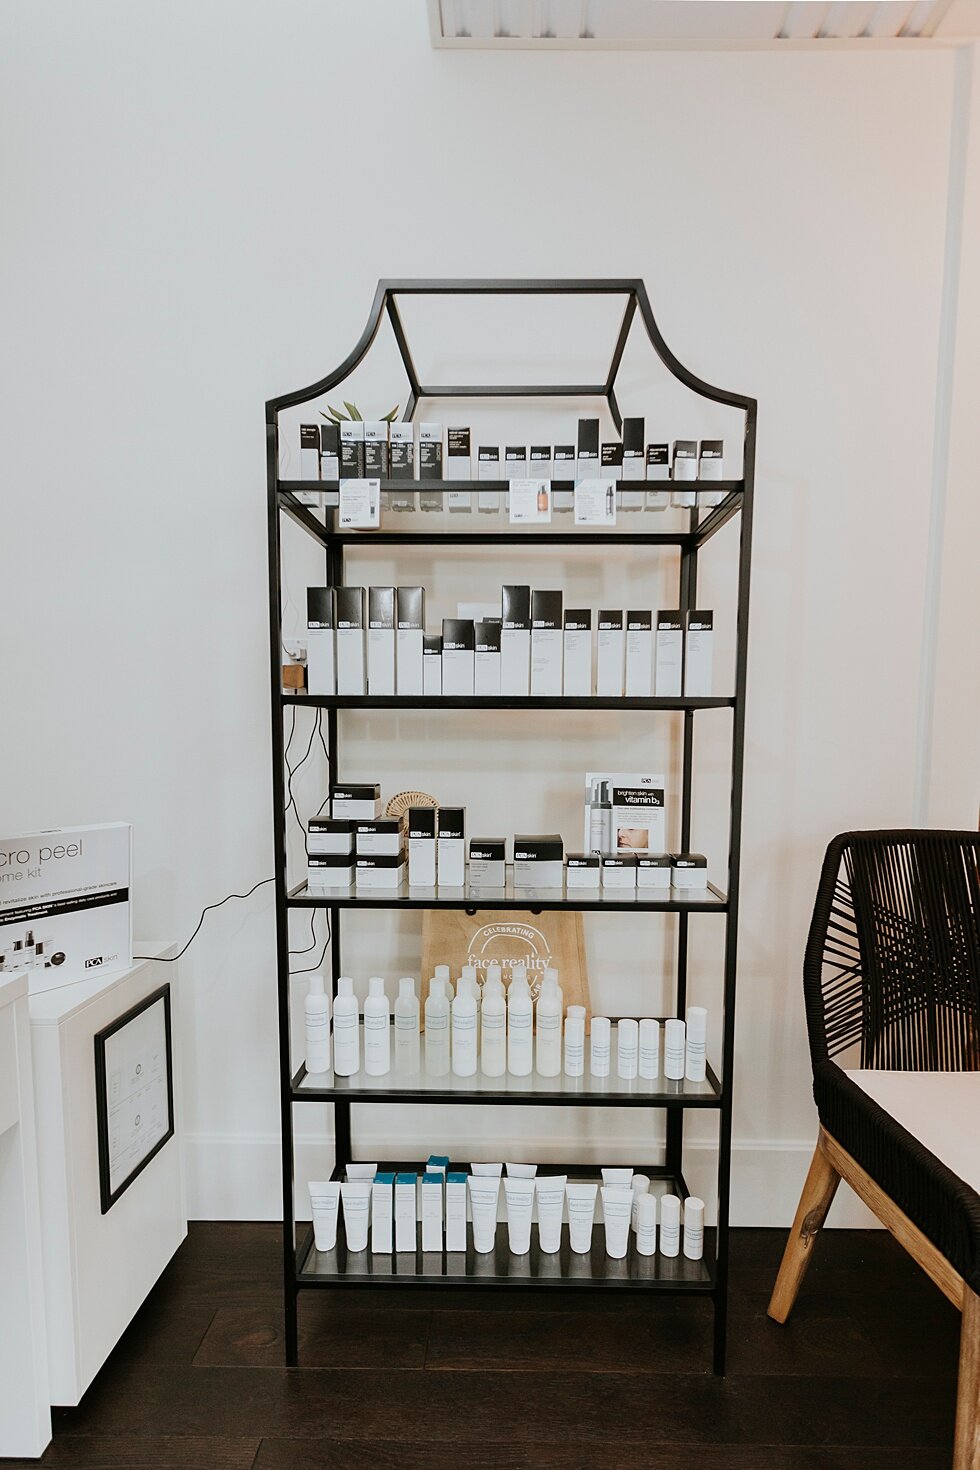  Available products at Skincare Boutique branding photography session for Skintuition in Louisville, Kentucky. clean lines modern boutique skincare health branding wellness selfcare gold black spa dermaplaning aesthetician specialty#branding #brandin